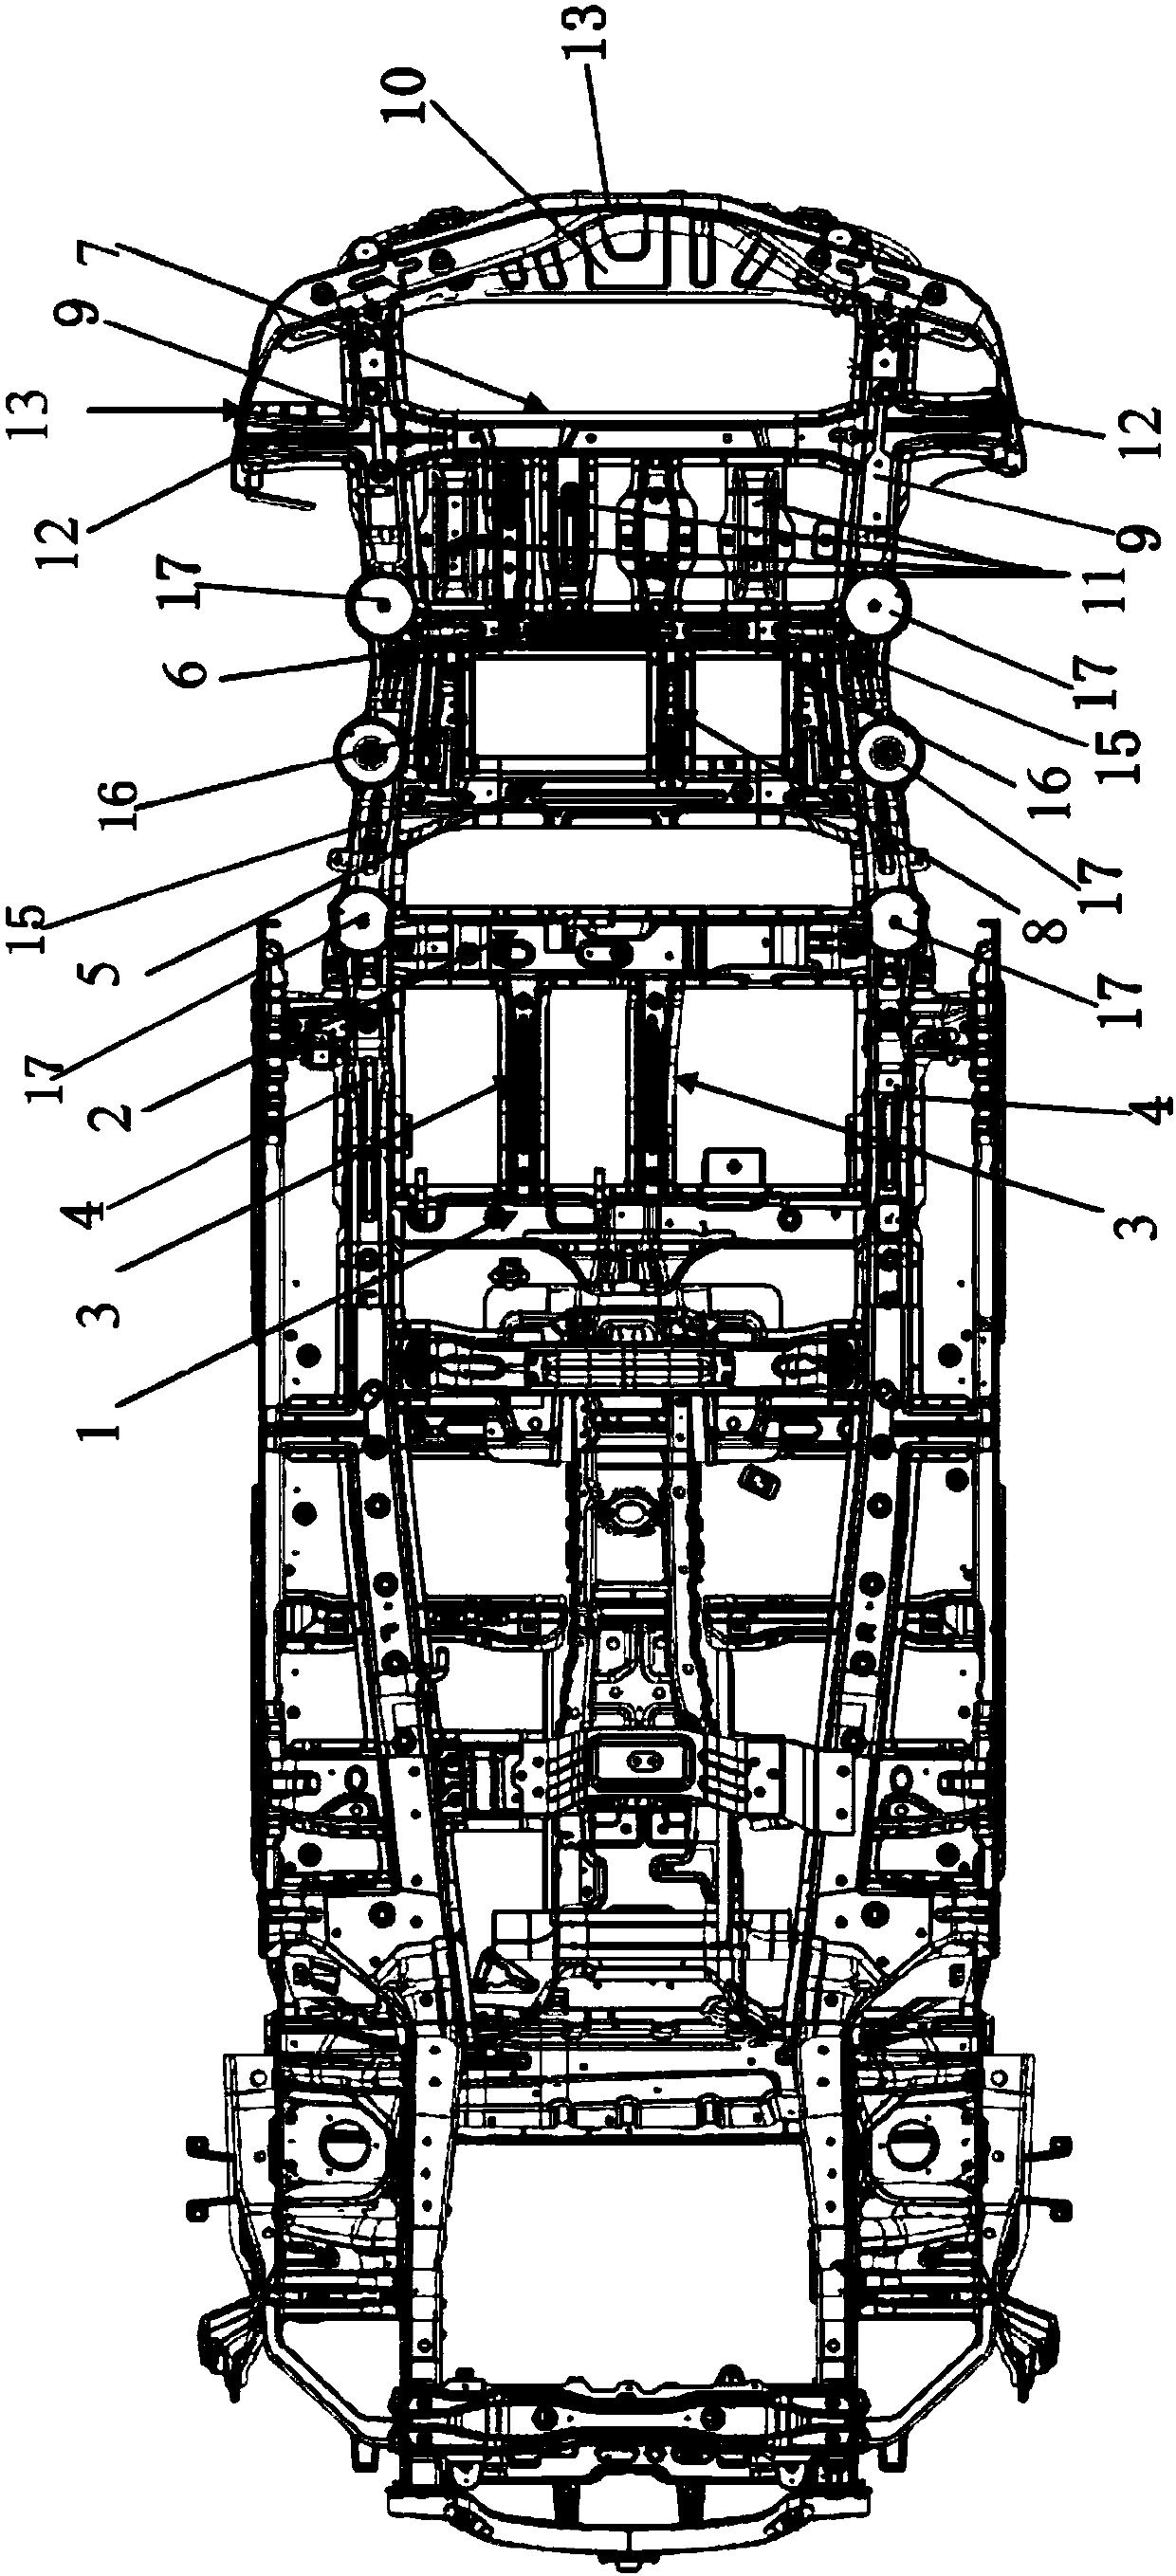 Rear frame assembly of vehicle body chassis